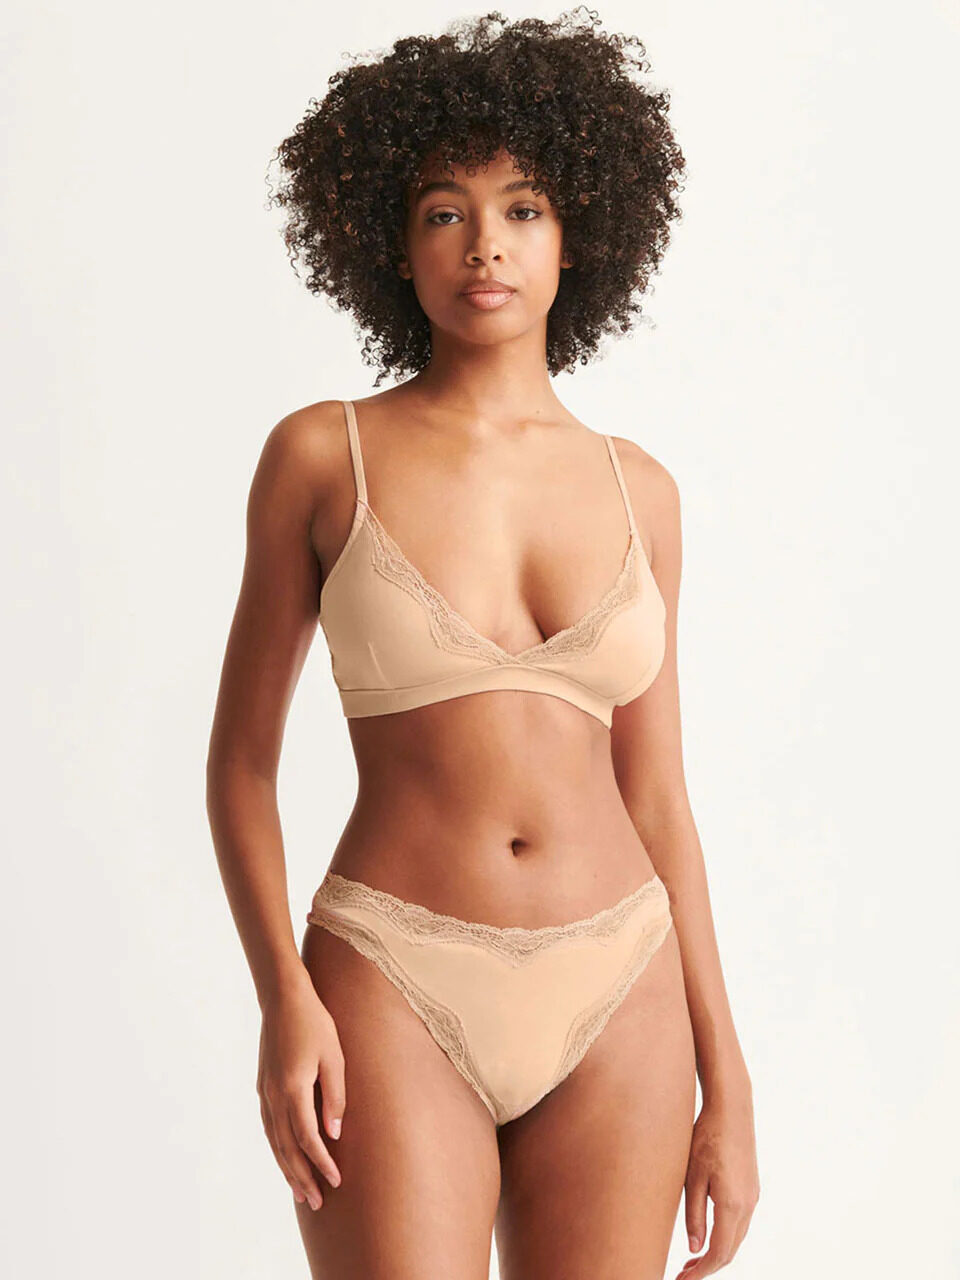 8 Responsibly-made Lingerie Brands for Your Body